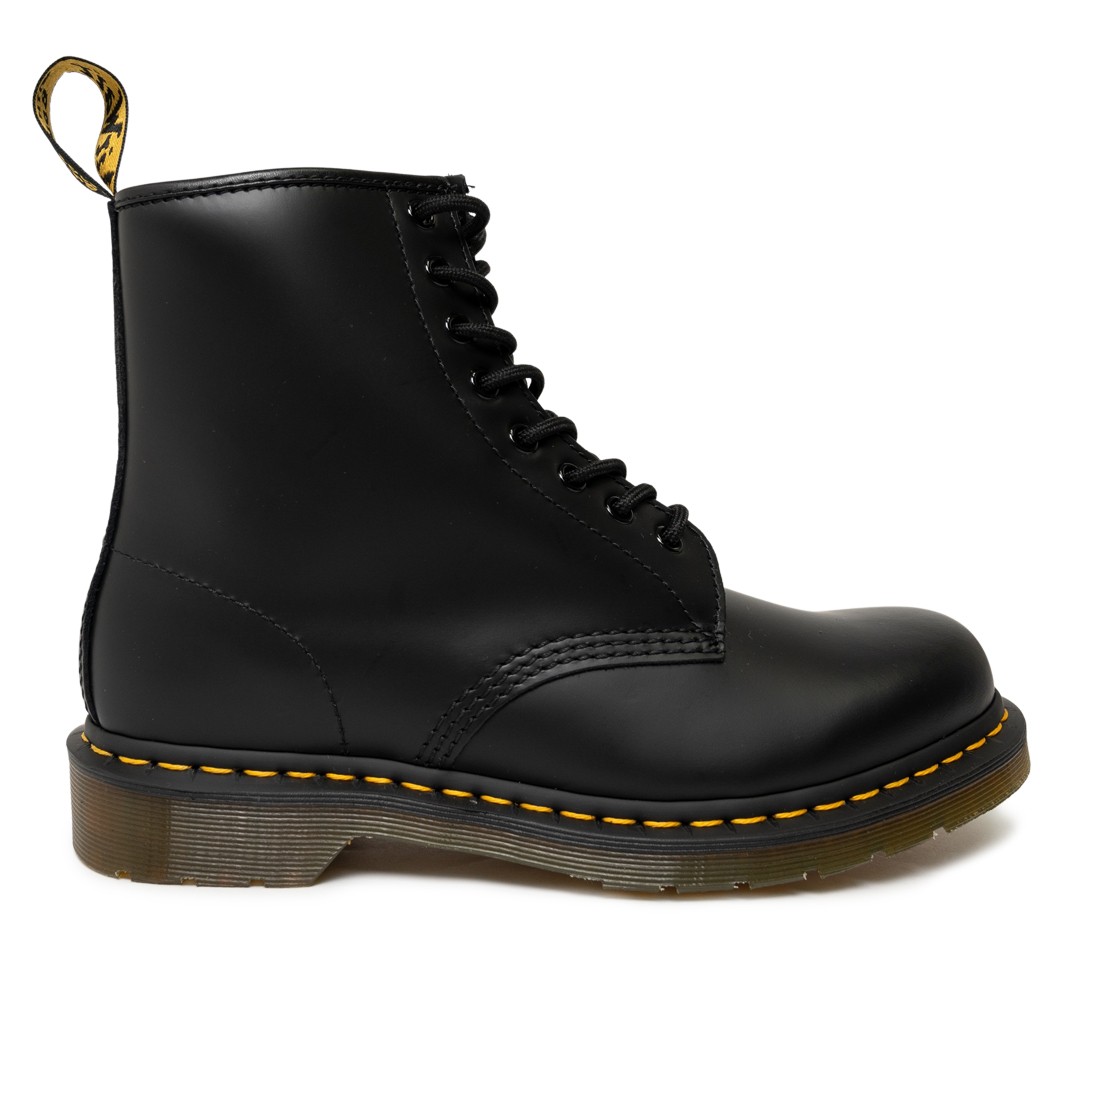 Napier Lil in the middle of nowhere Dr. Martens Men 1460 Smooth Leather Lace Up Boots black black smooth